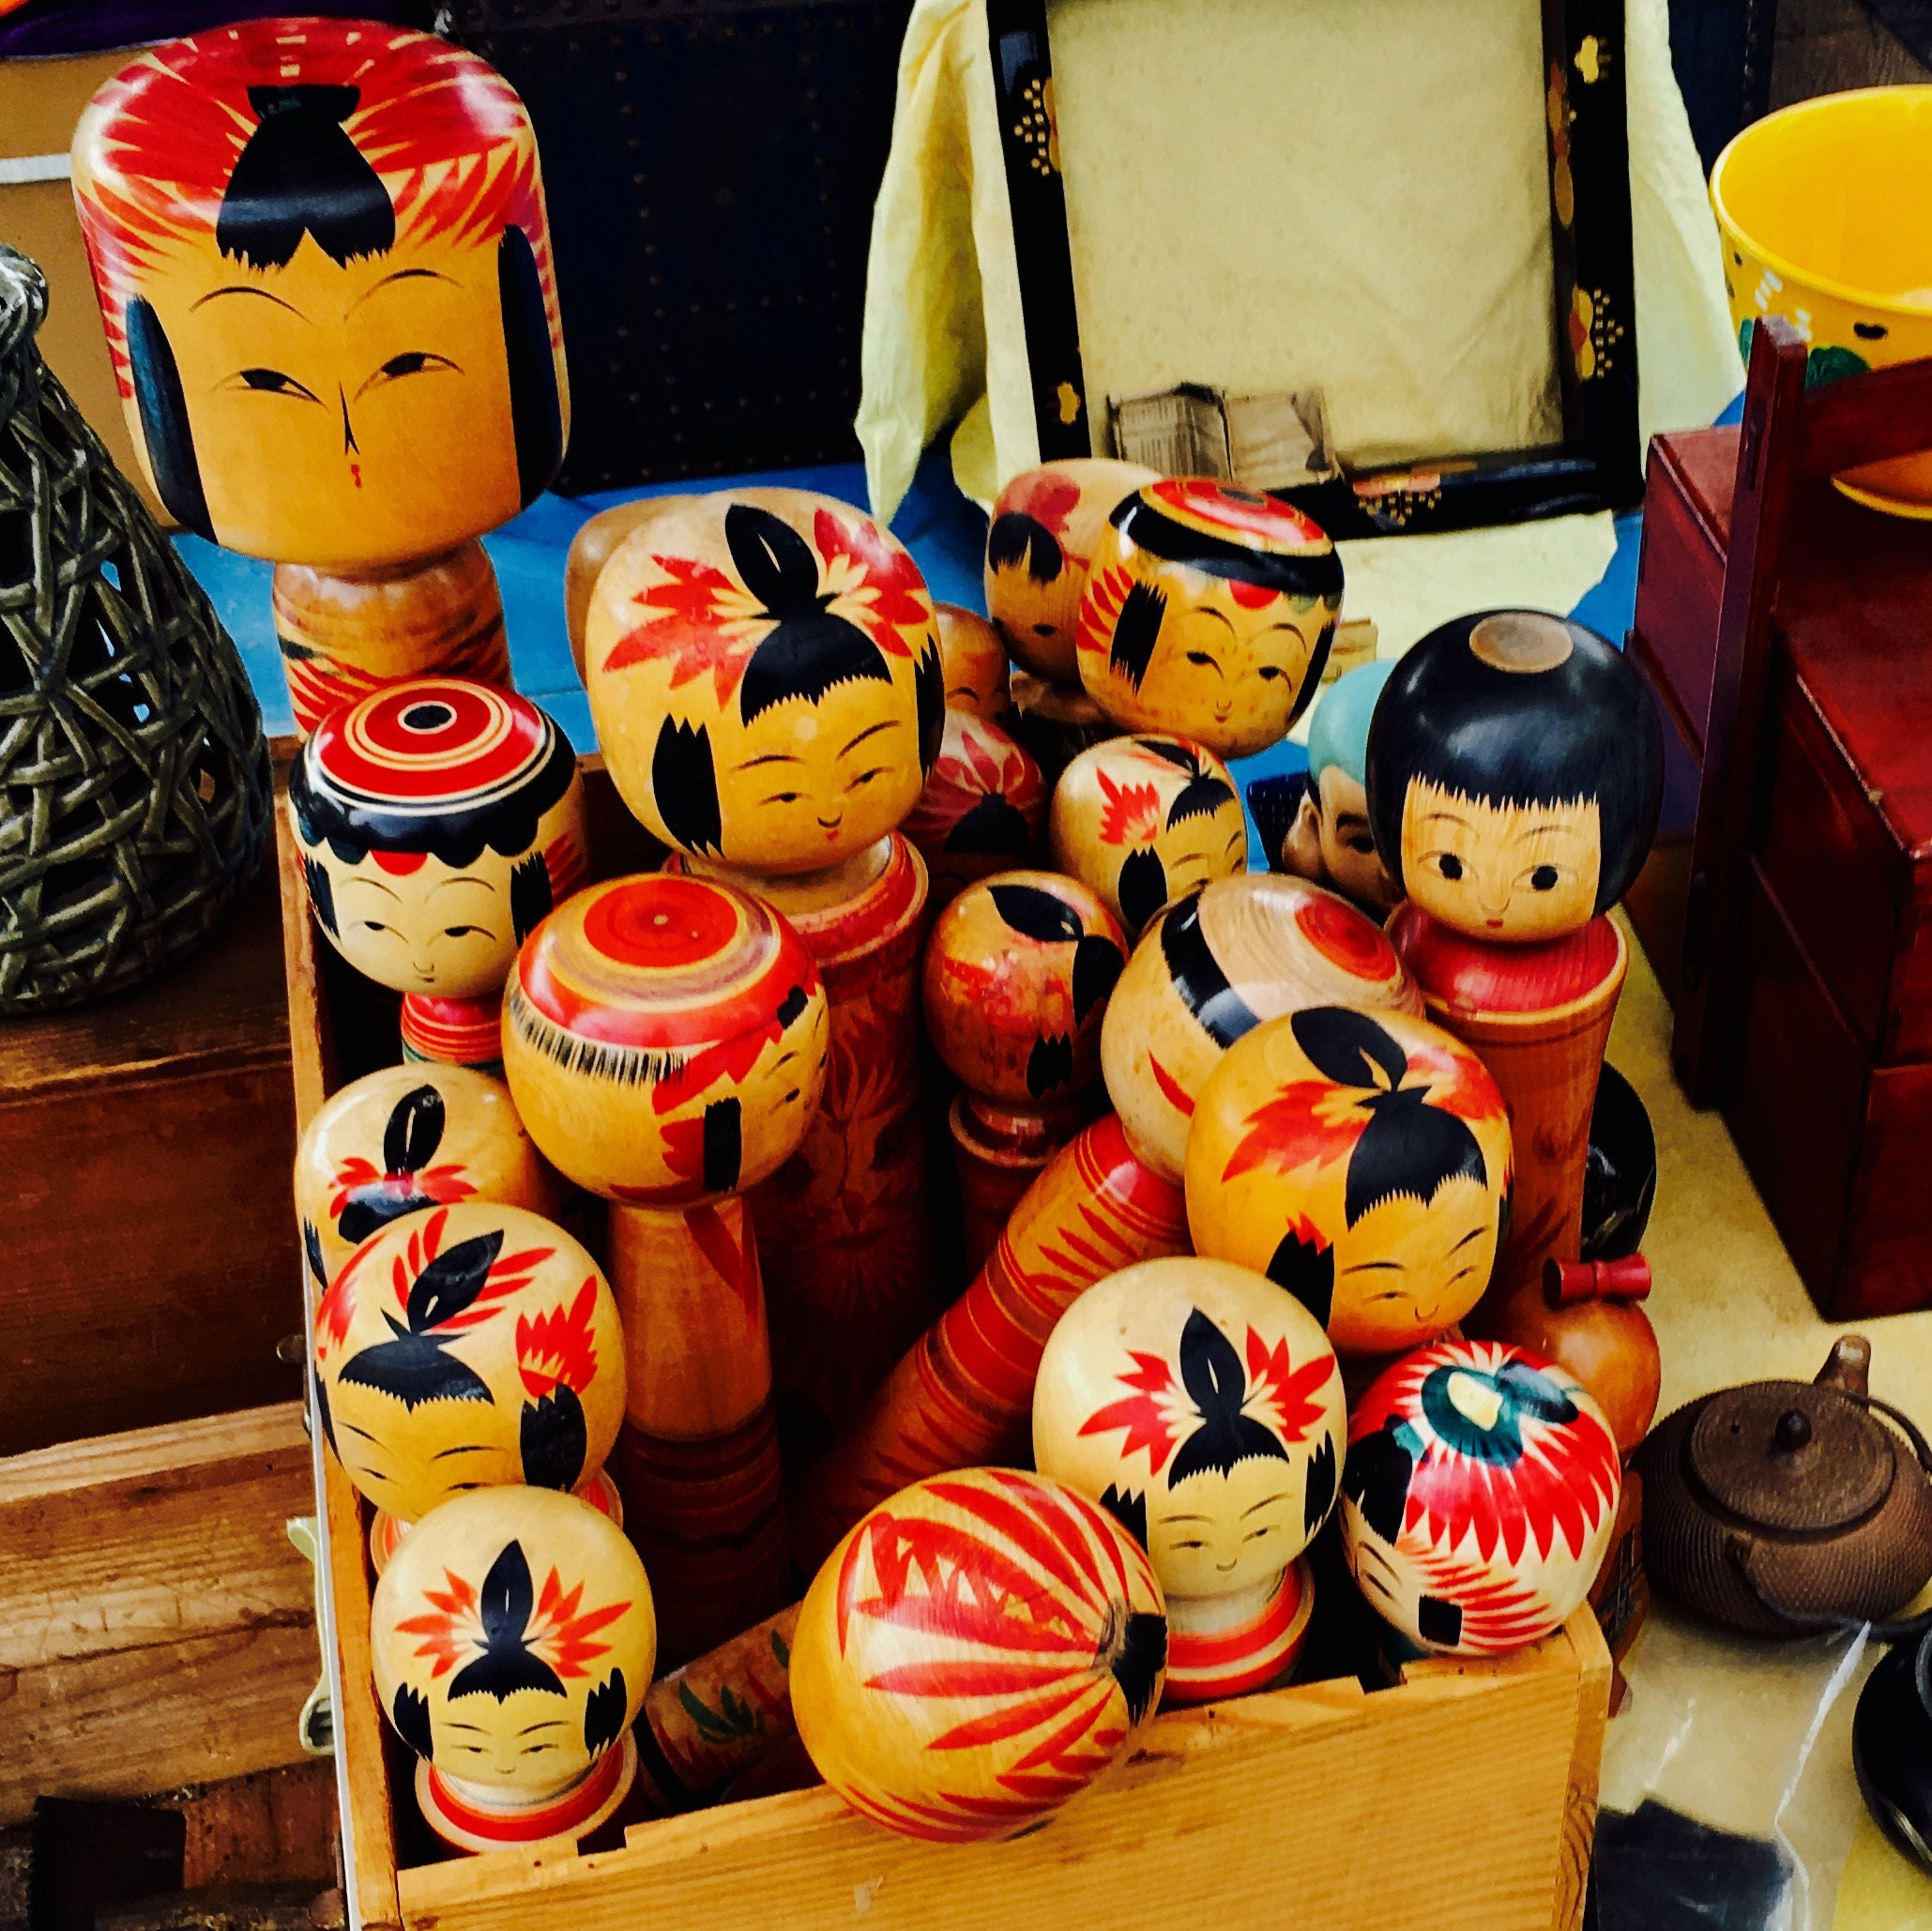 Guide to Japanese folk toys